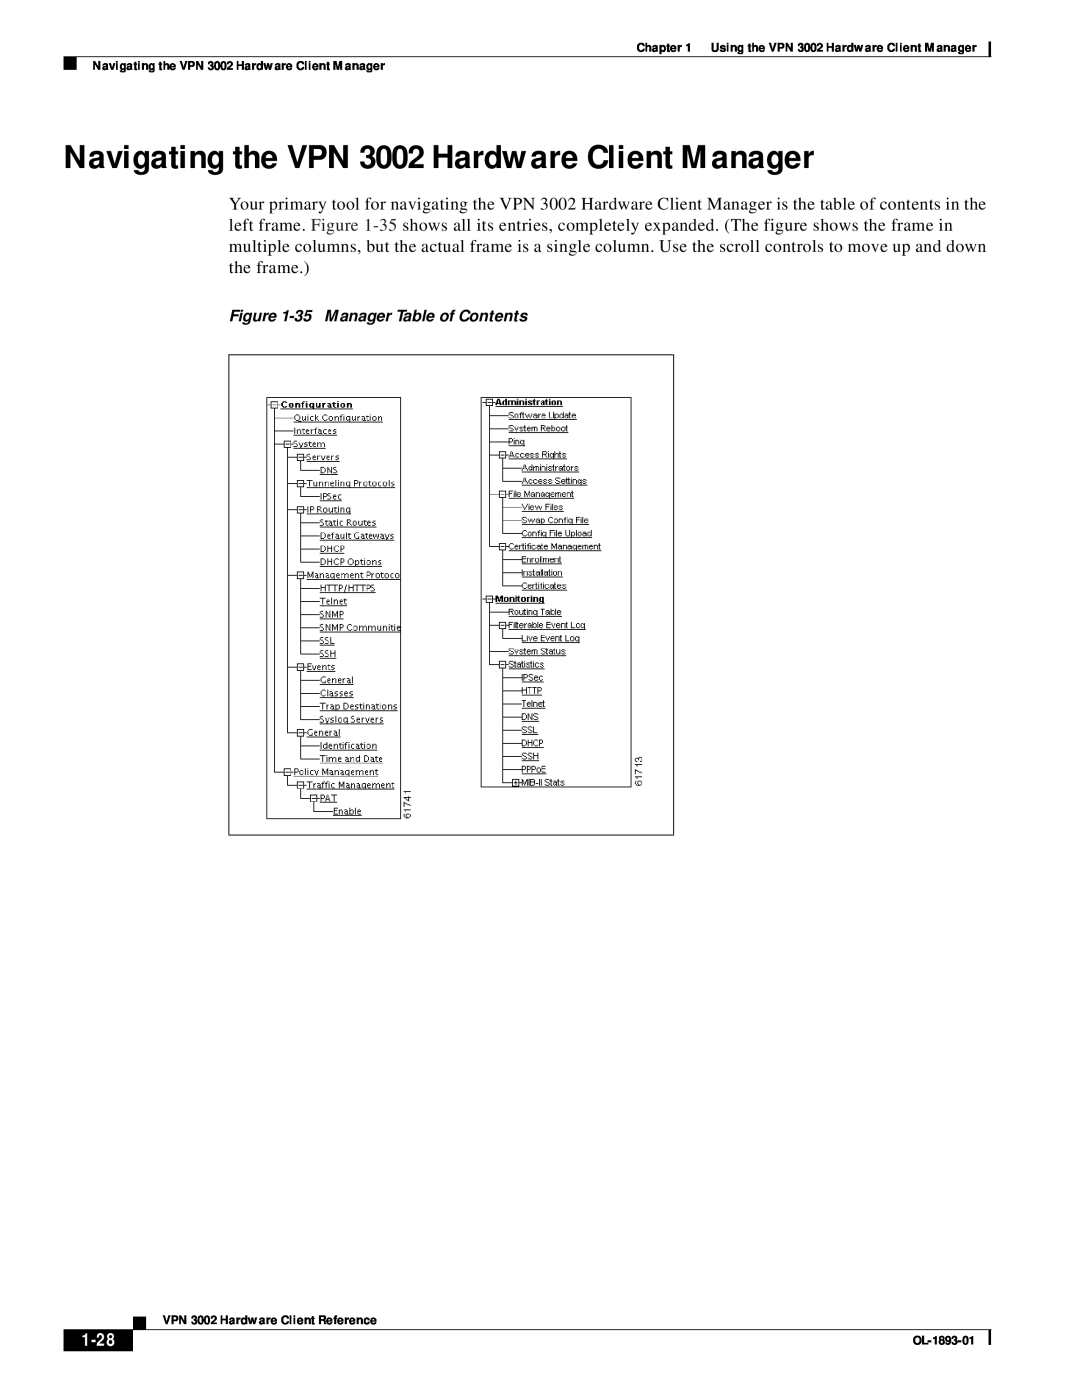 Cisco Systems manual Navigating the VPN 3002 Hardware Client Manager, 1-28, 35Manager Table of Contents 